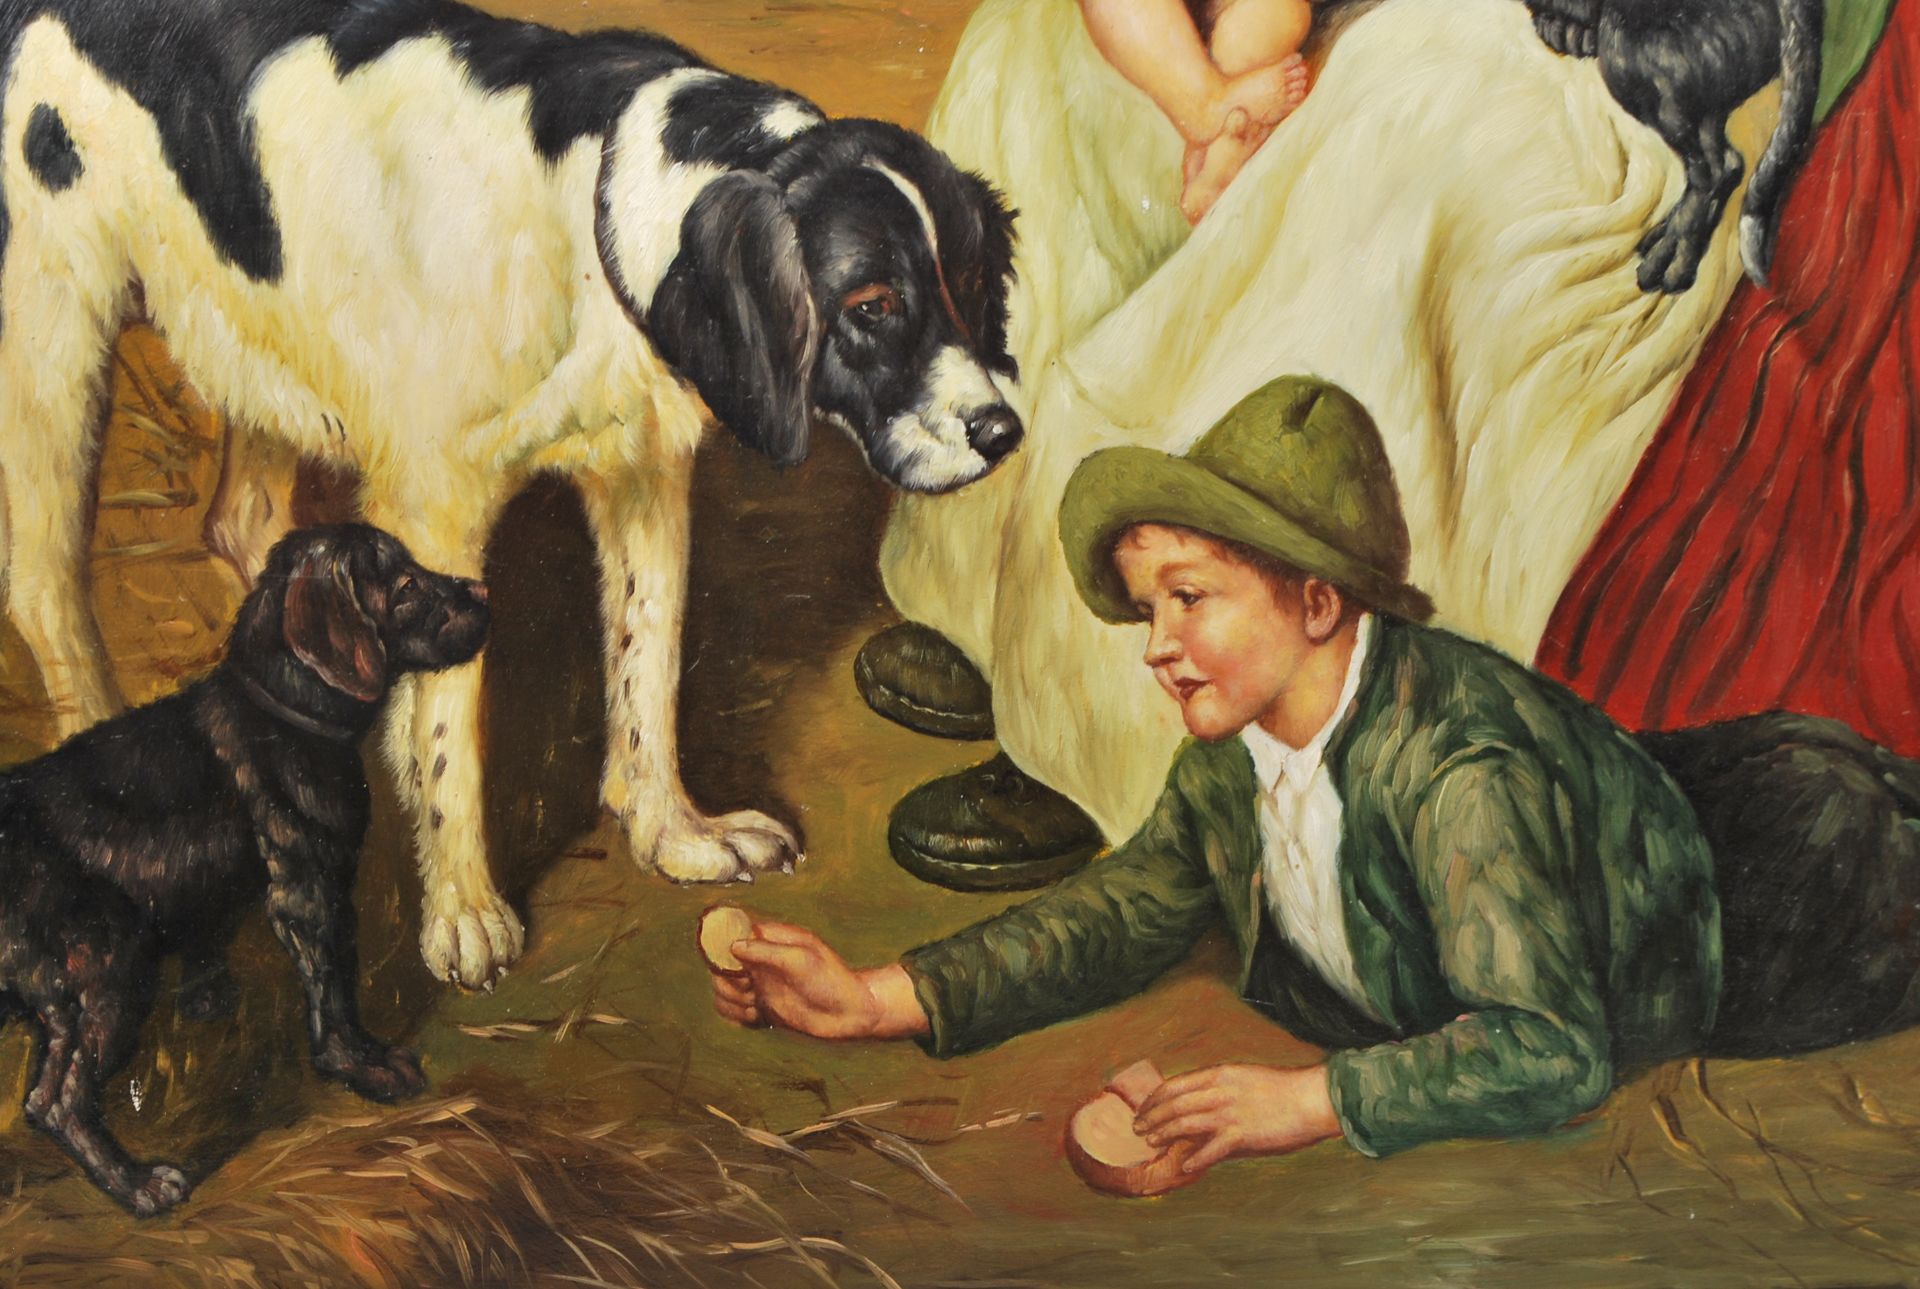 VINTAGE MID CENTURY VICTORIAN REVIVAL OIL ON BOARD PAINTING OF A YOUNG FAMILY PLAYING WITH PUPPIES - Image 4 of 5